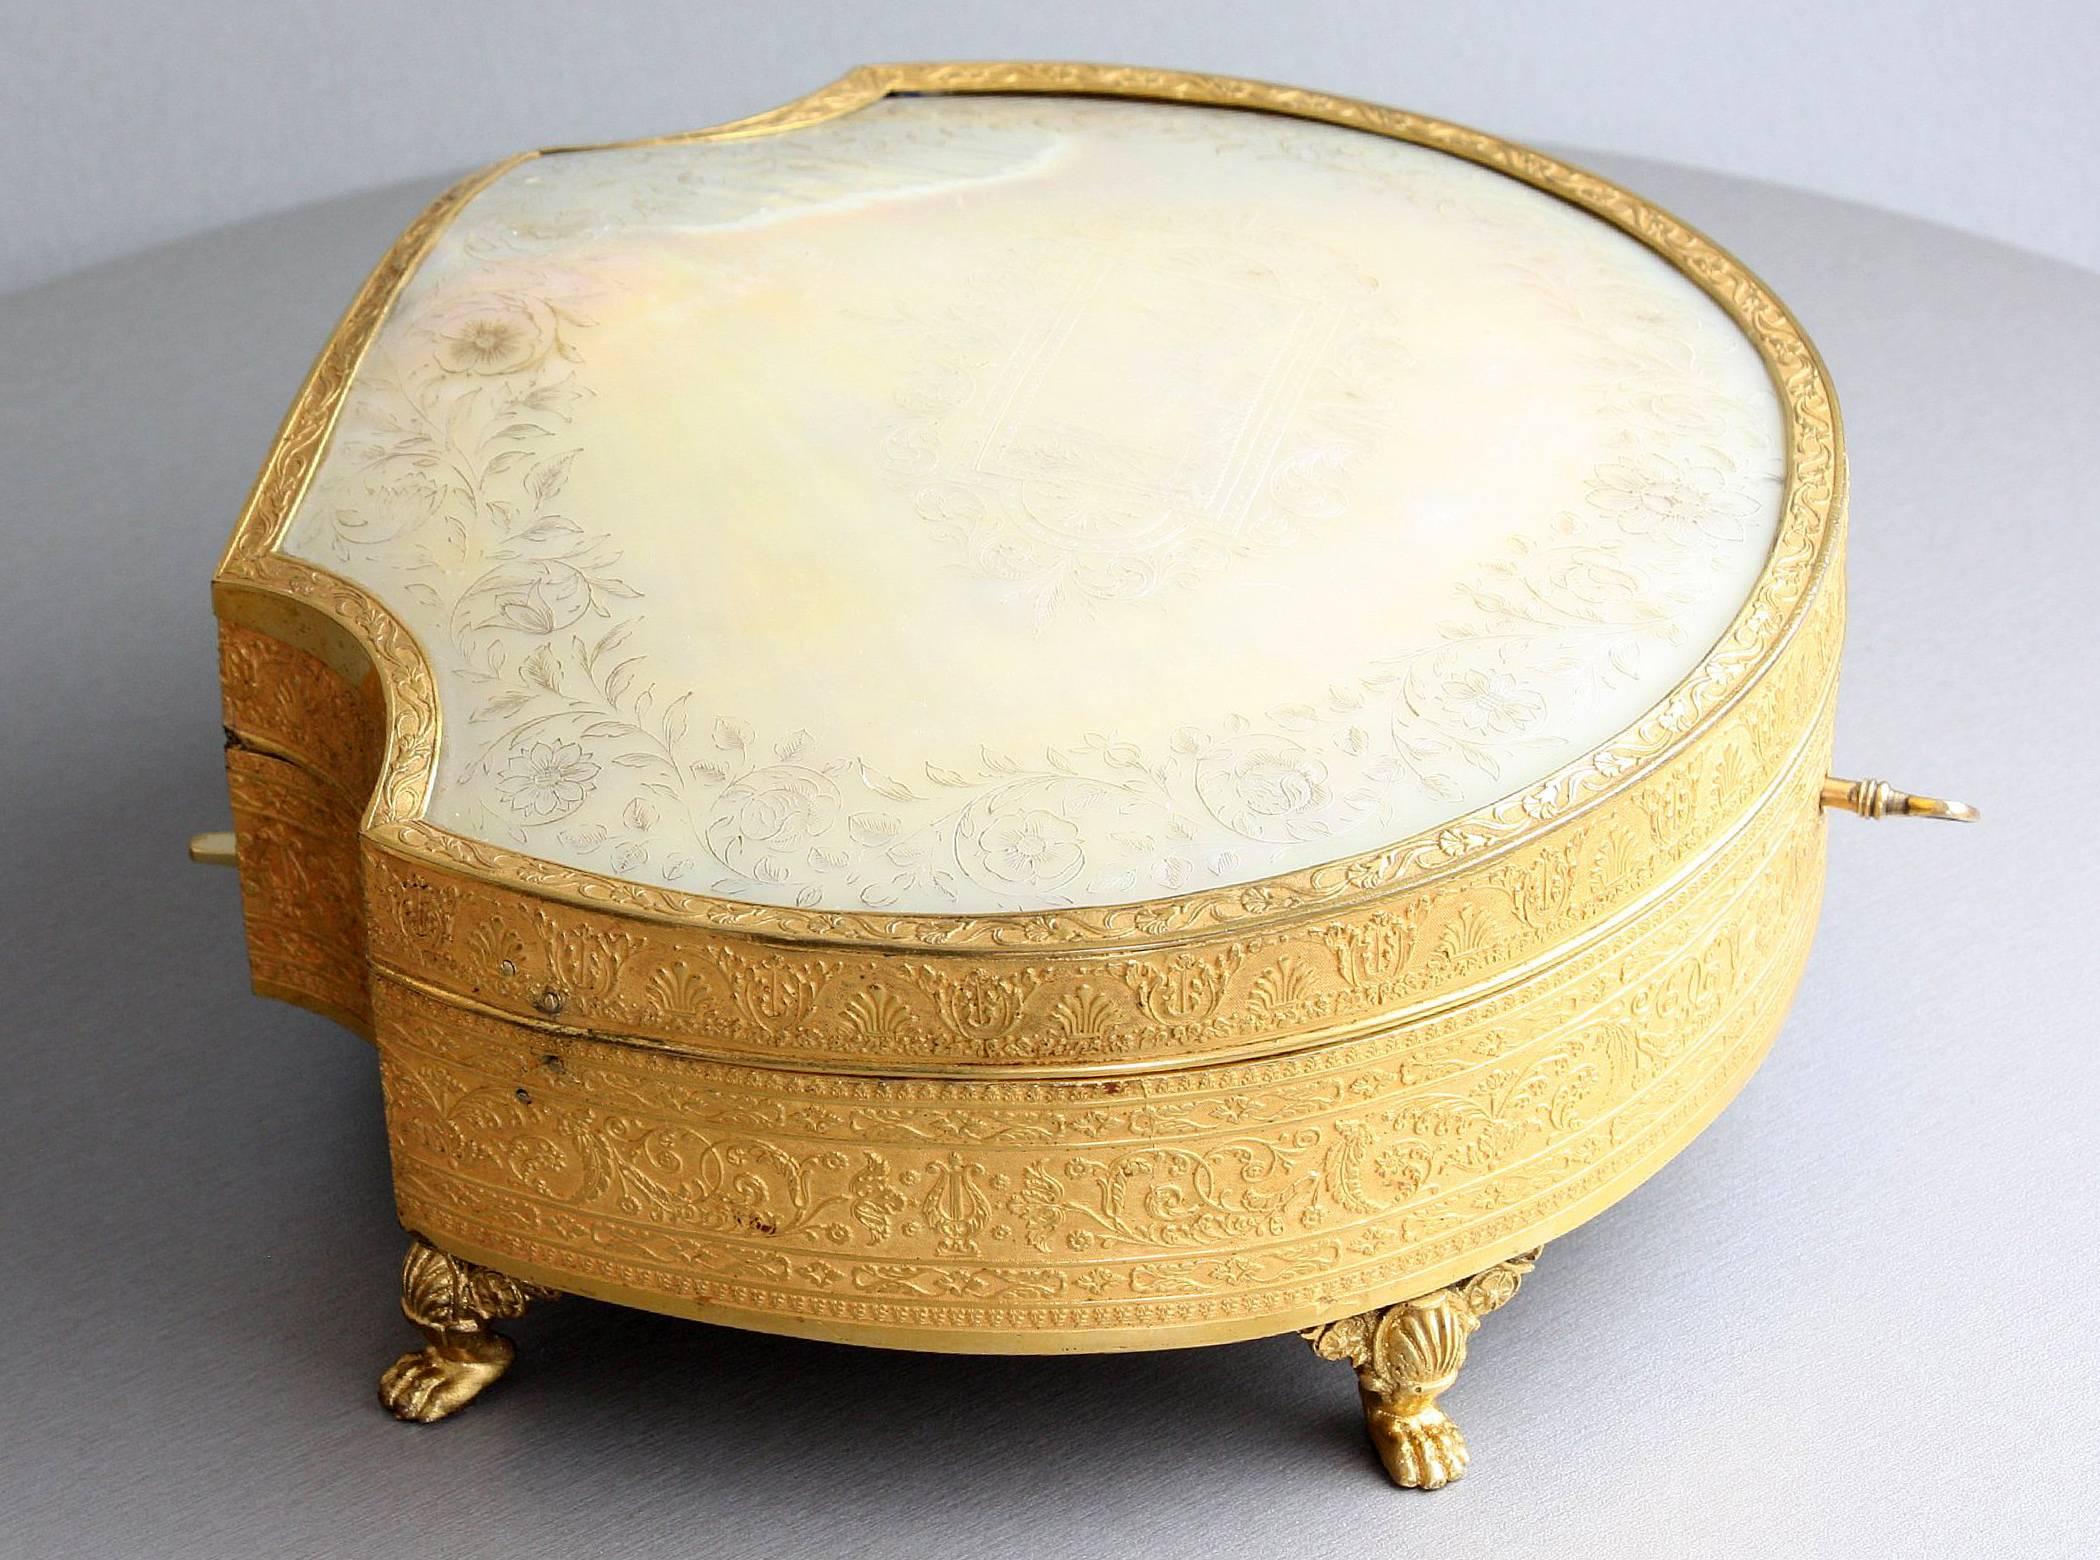 French Antique Gilt Metal and Silver-Gilt Palais Royale Musical Necessaire